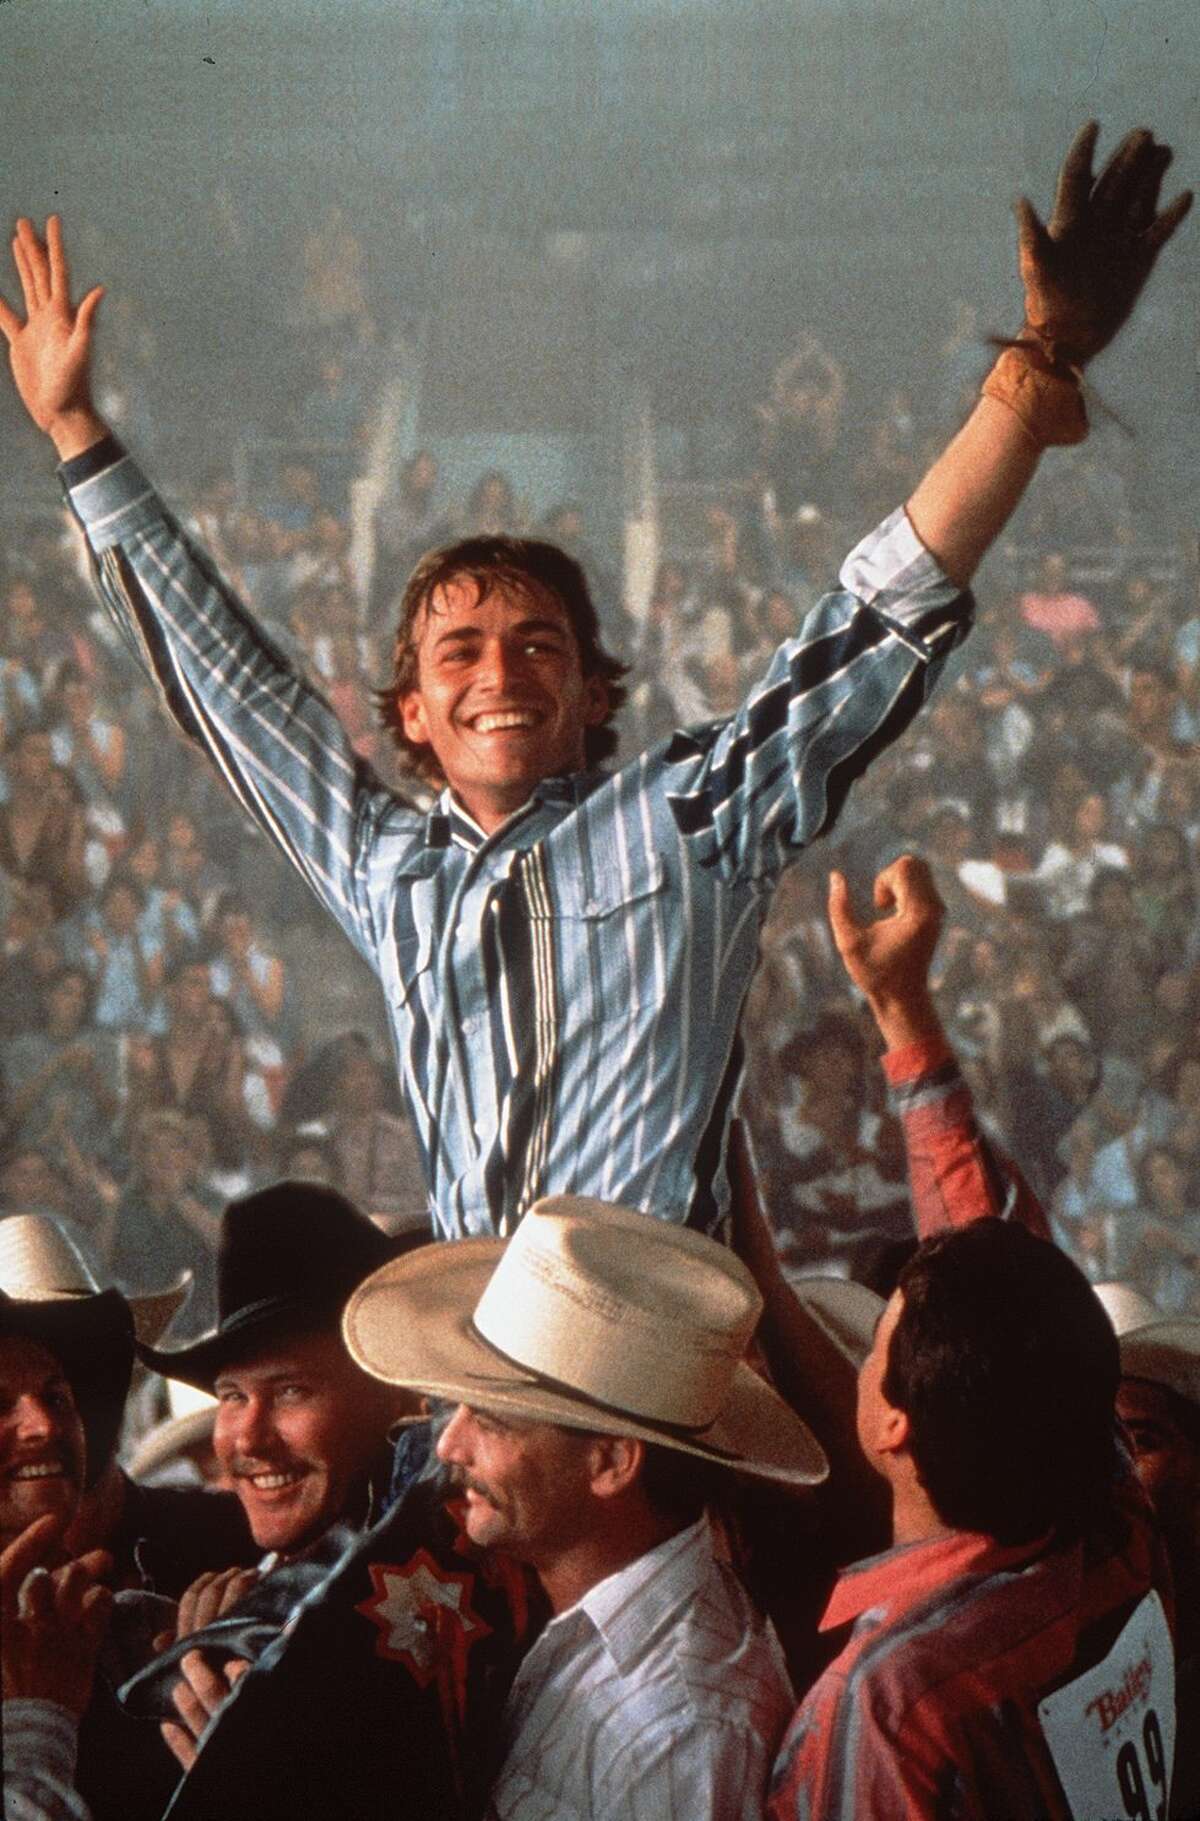 Free download For Lane Frost Bull Riding Wallpaper HD Walls Find Wallpapers  600x398 for your Desktop Mobile  Tablet  Explore 50 Lane Frost  Wallpaper  Emma Frost Wallpaper Frost Mage Wallpaper Frost Wallpaper